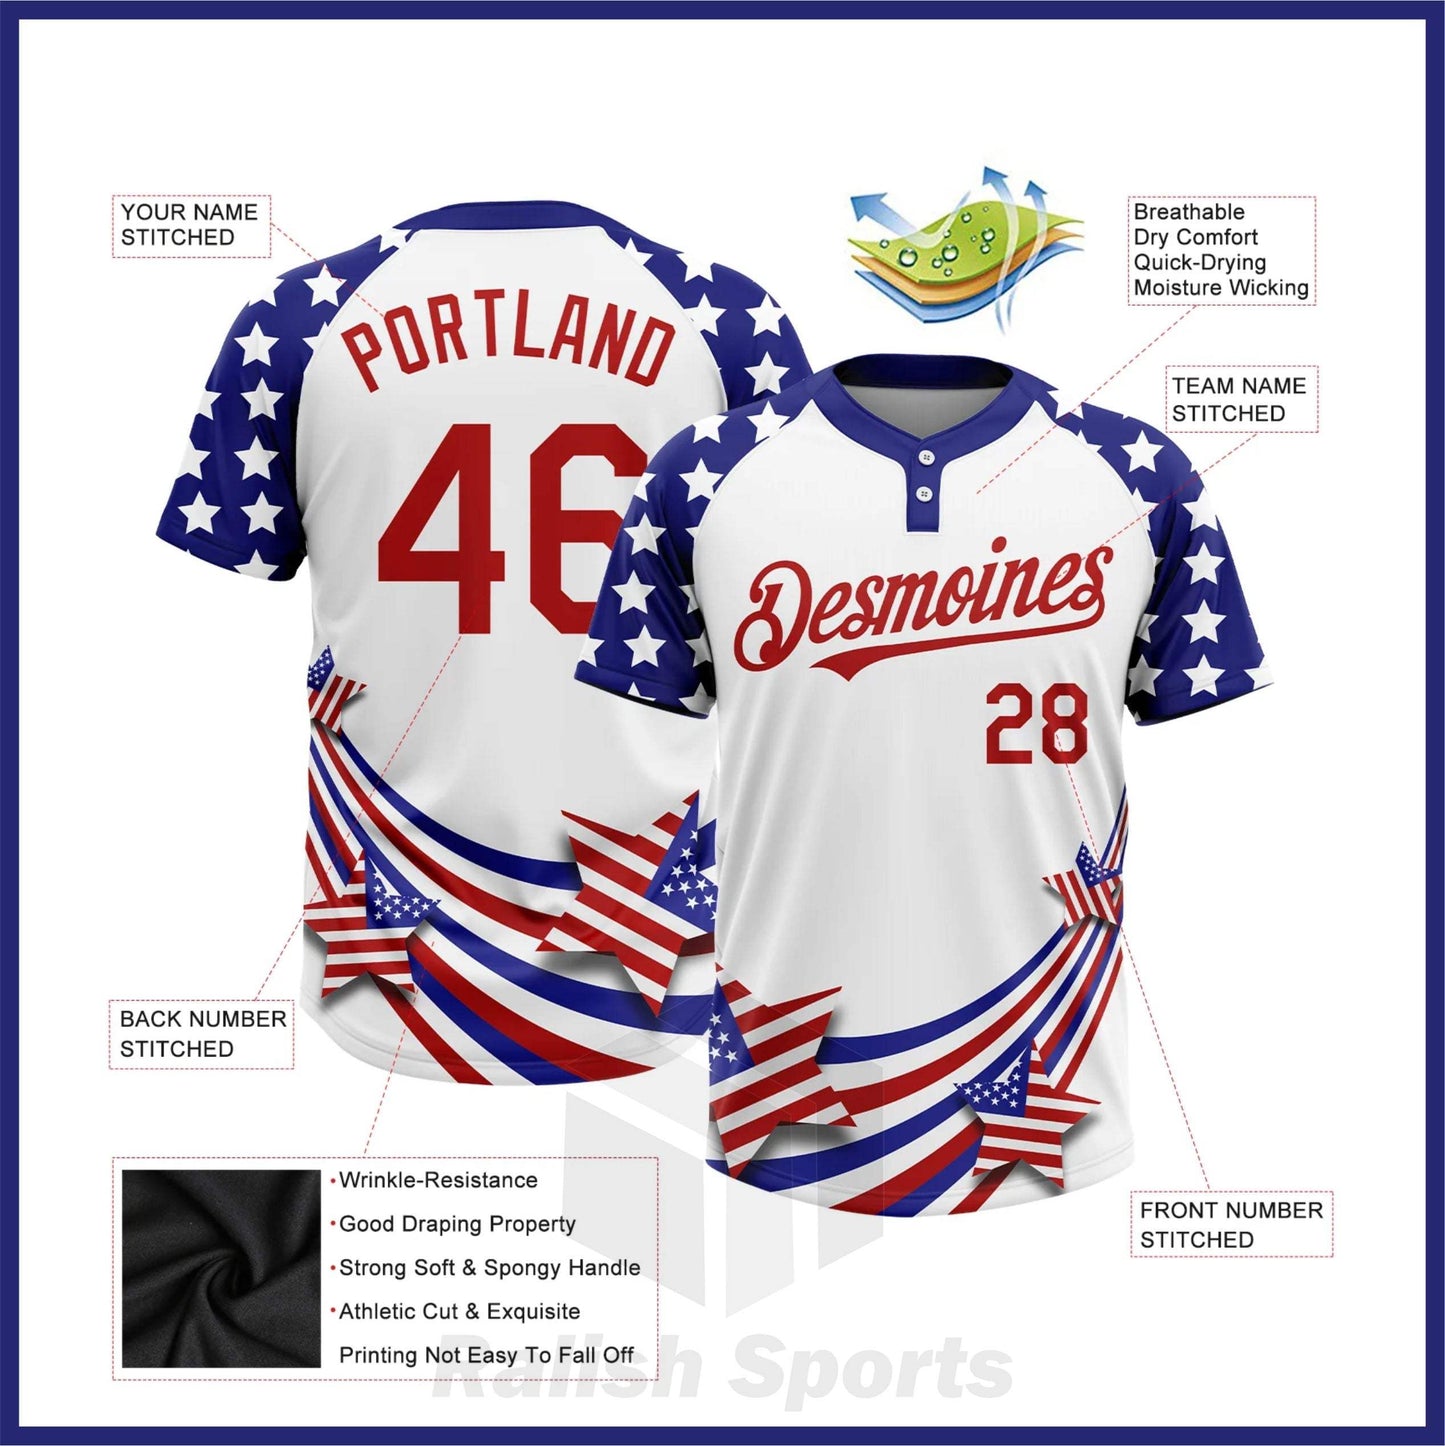 Custom White Red-Navy 3D American Flag Fashion Two-Button Unisex Softball Jersey - Ralish Sports